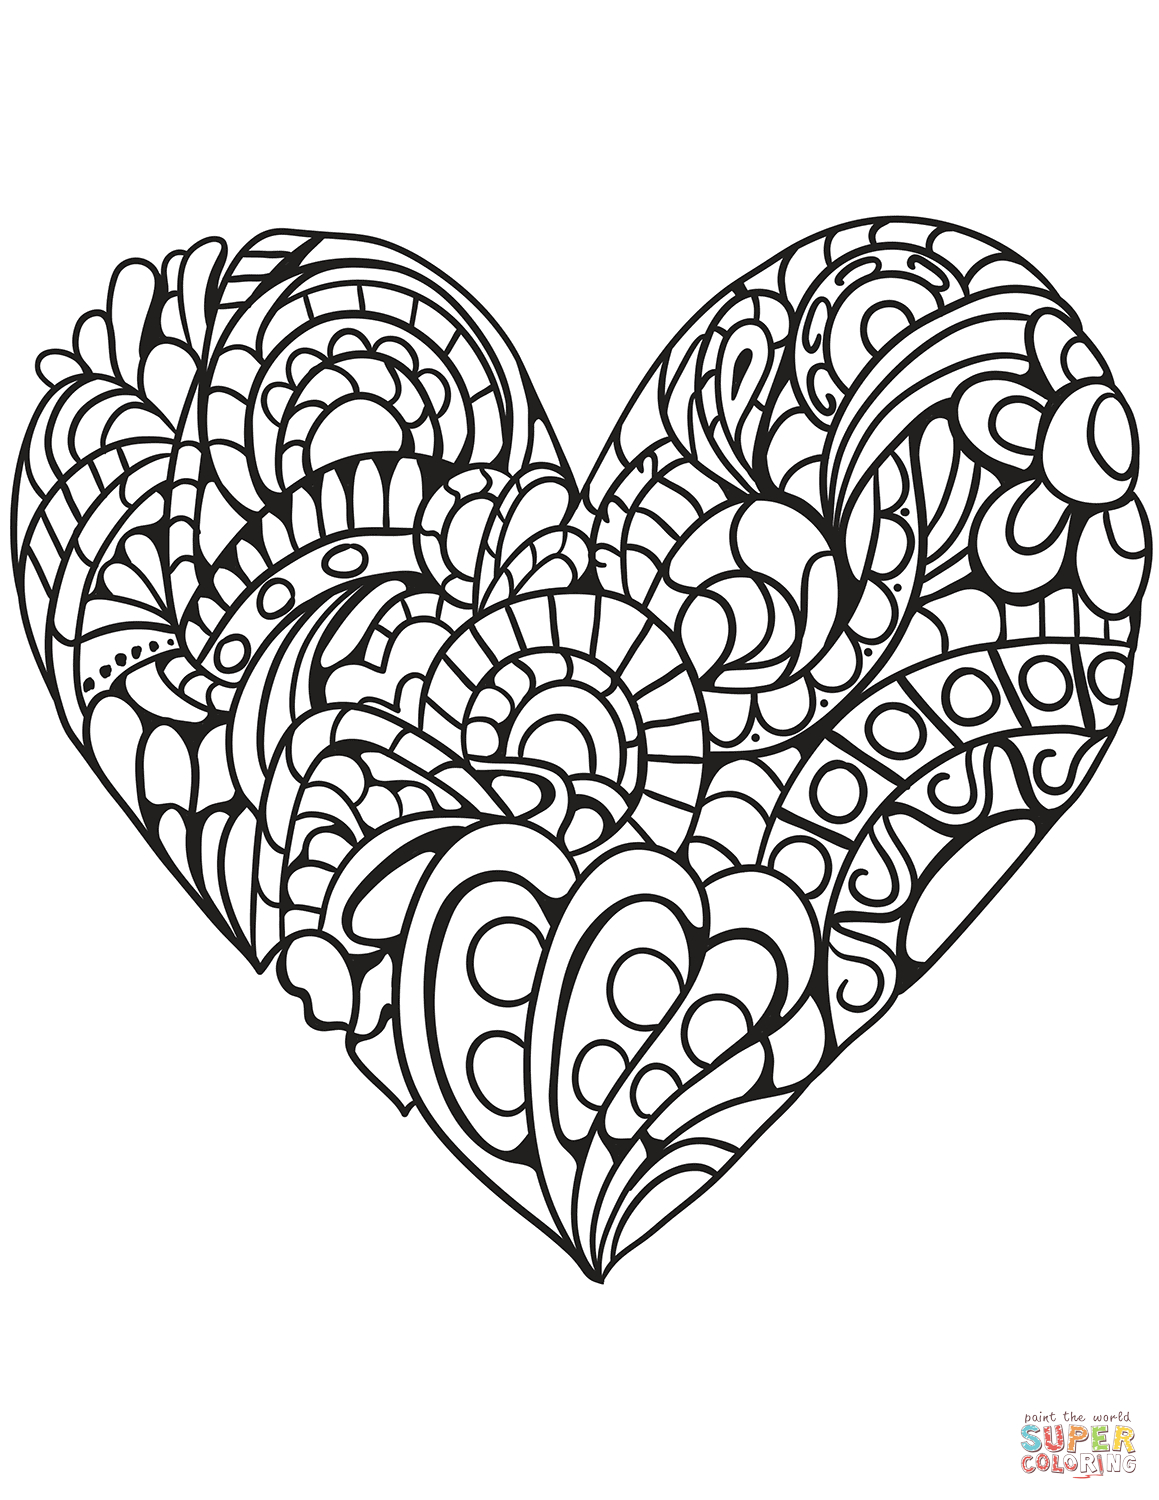 Zentangle Heart Coloring Page | Free Printable Coloring Pages - Free Printable Heart Coloring Pages